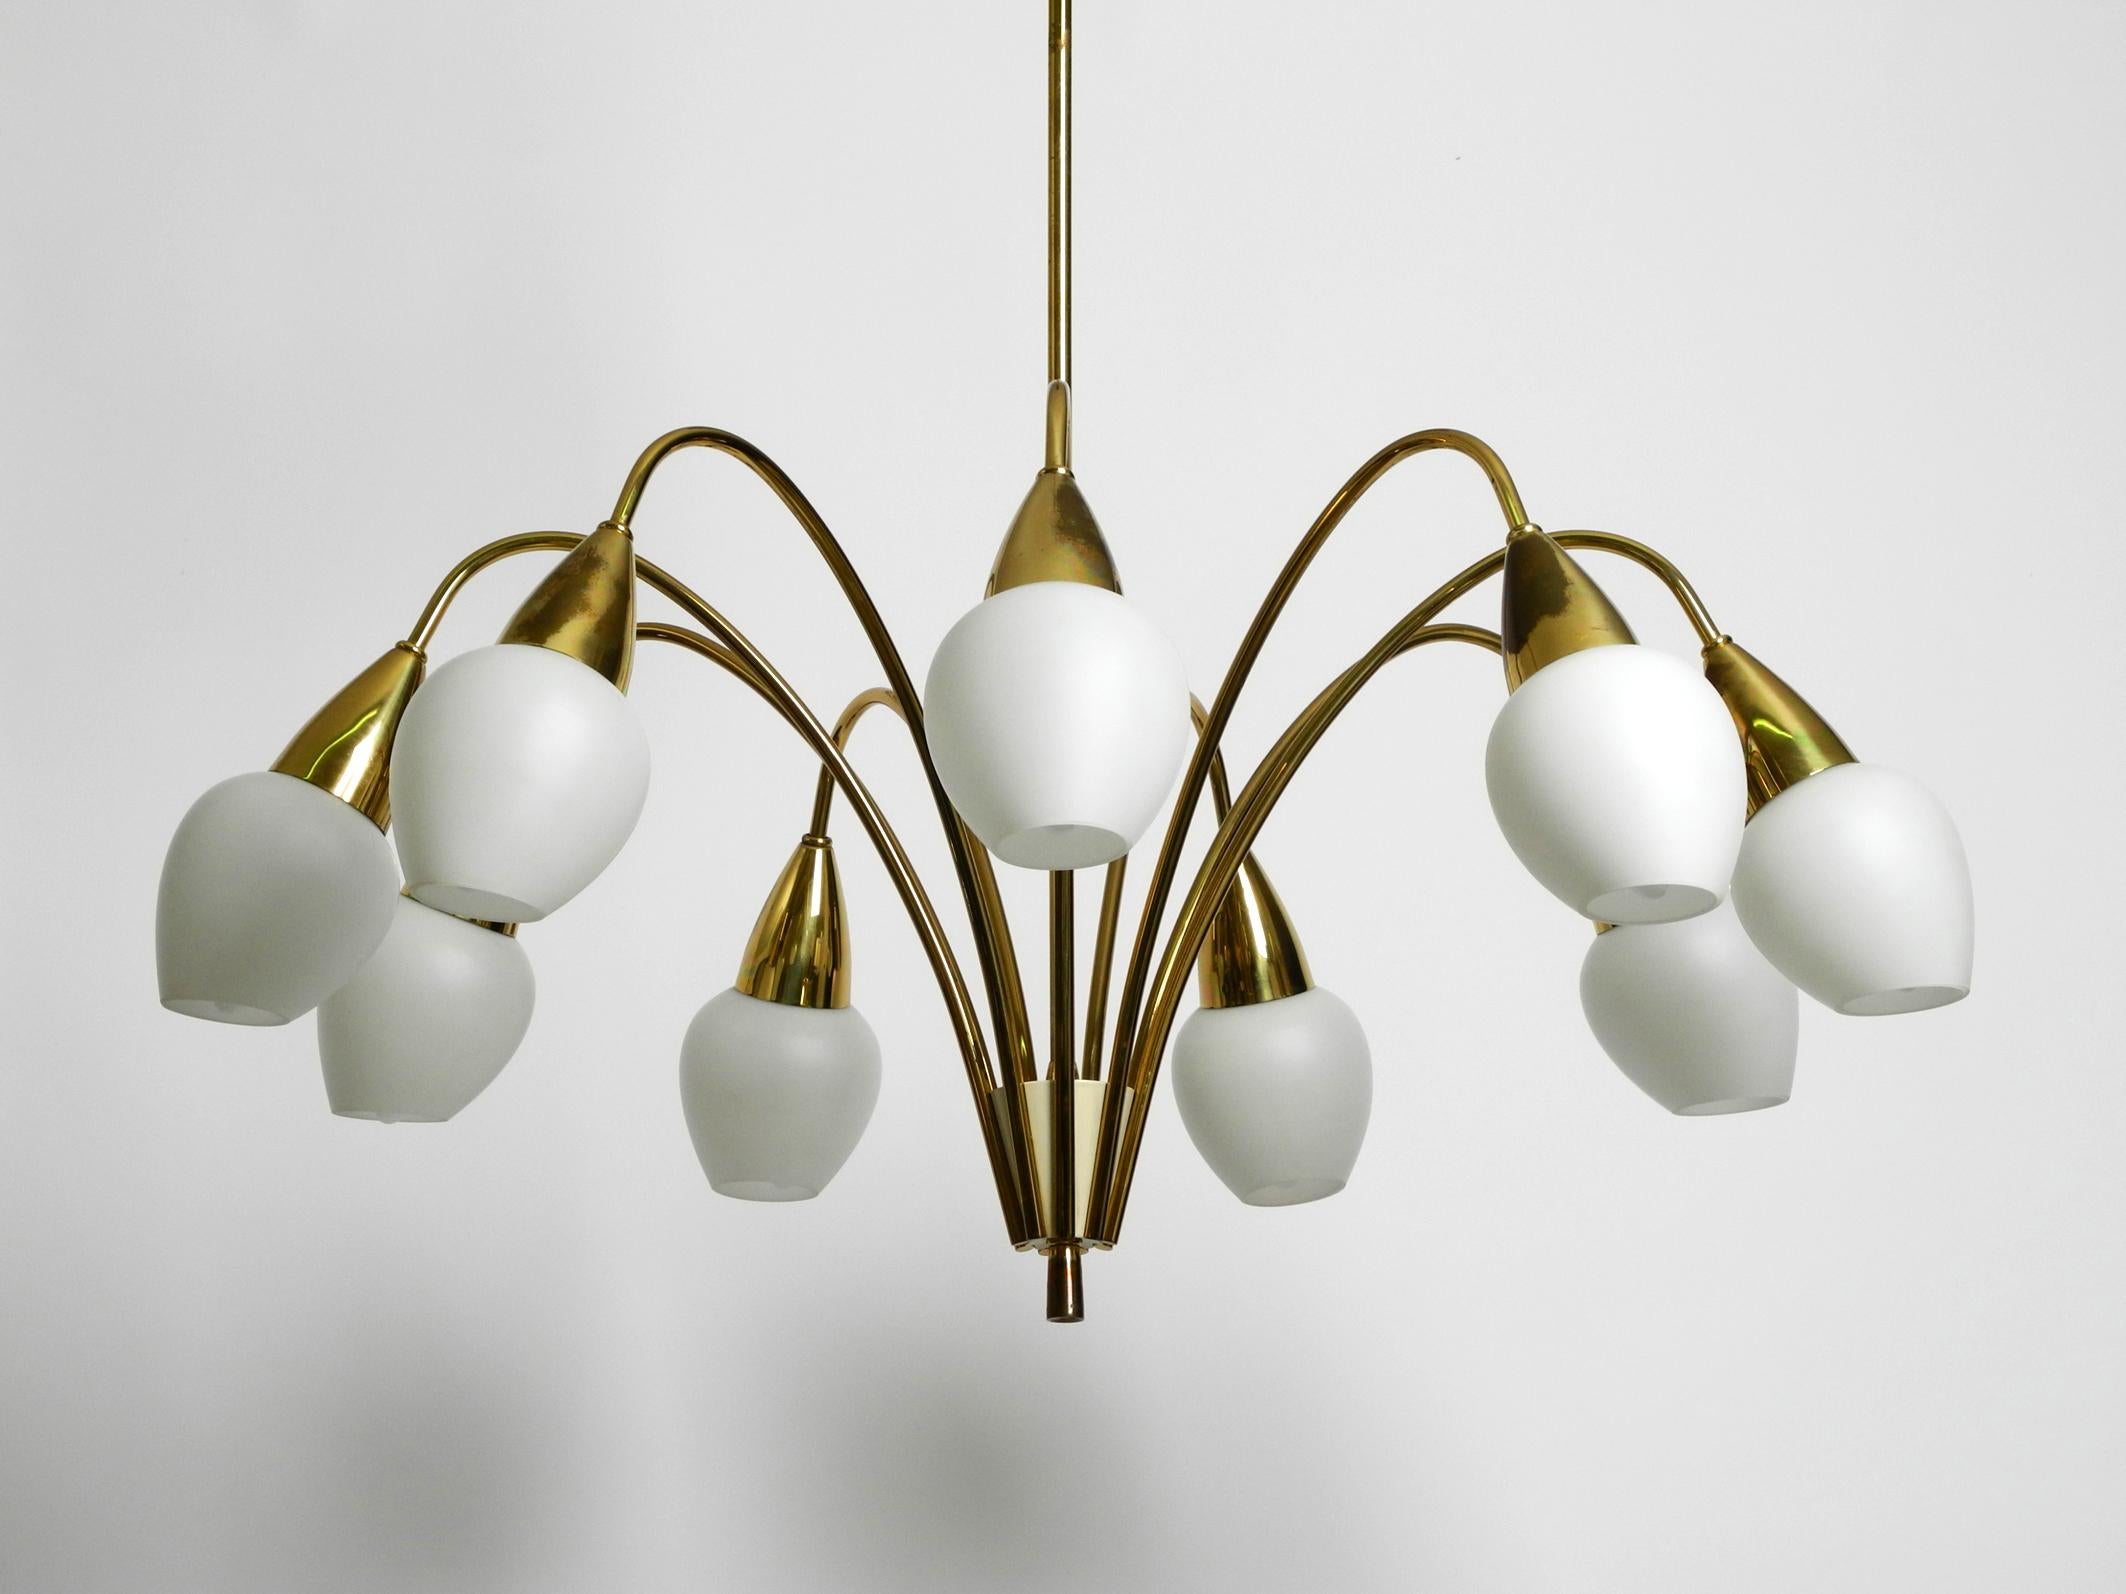 Beautiful, rare 9-armed large Mid Century brass chandelier with opal glass shades.
A very high quality lamp with lots of details.
Beautiful 1950s design. Entire frame is made of brass.
Very good condition and fully functional. No damage to the